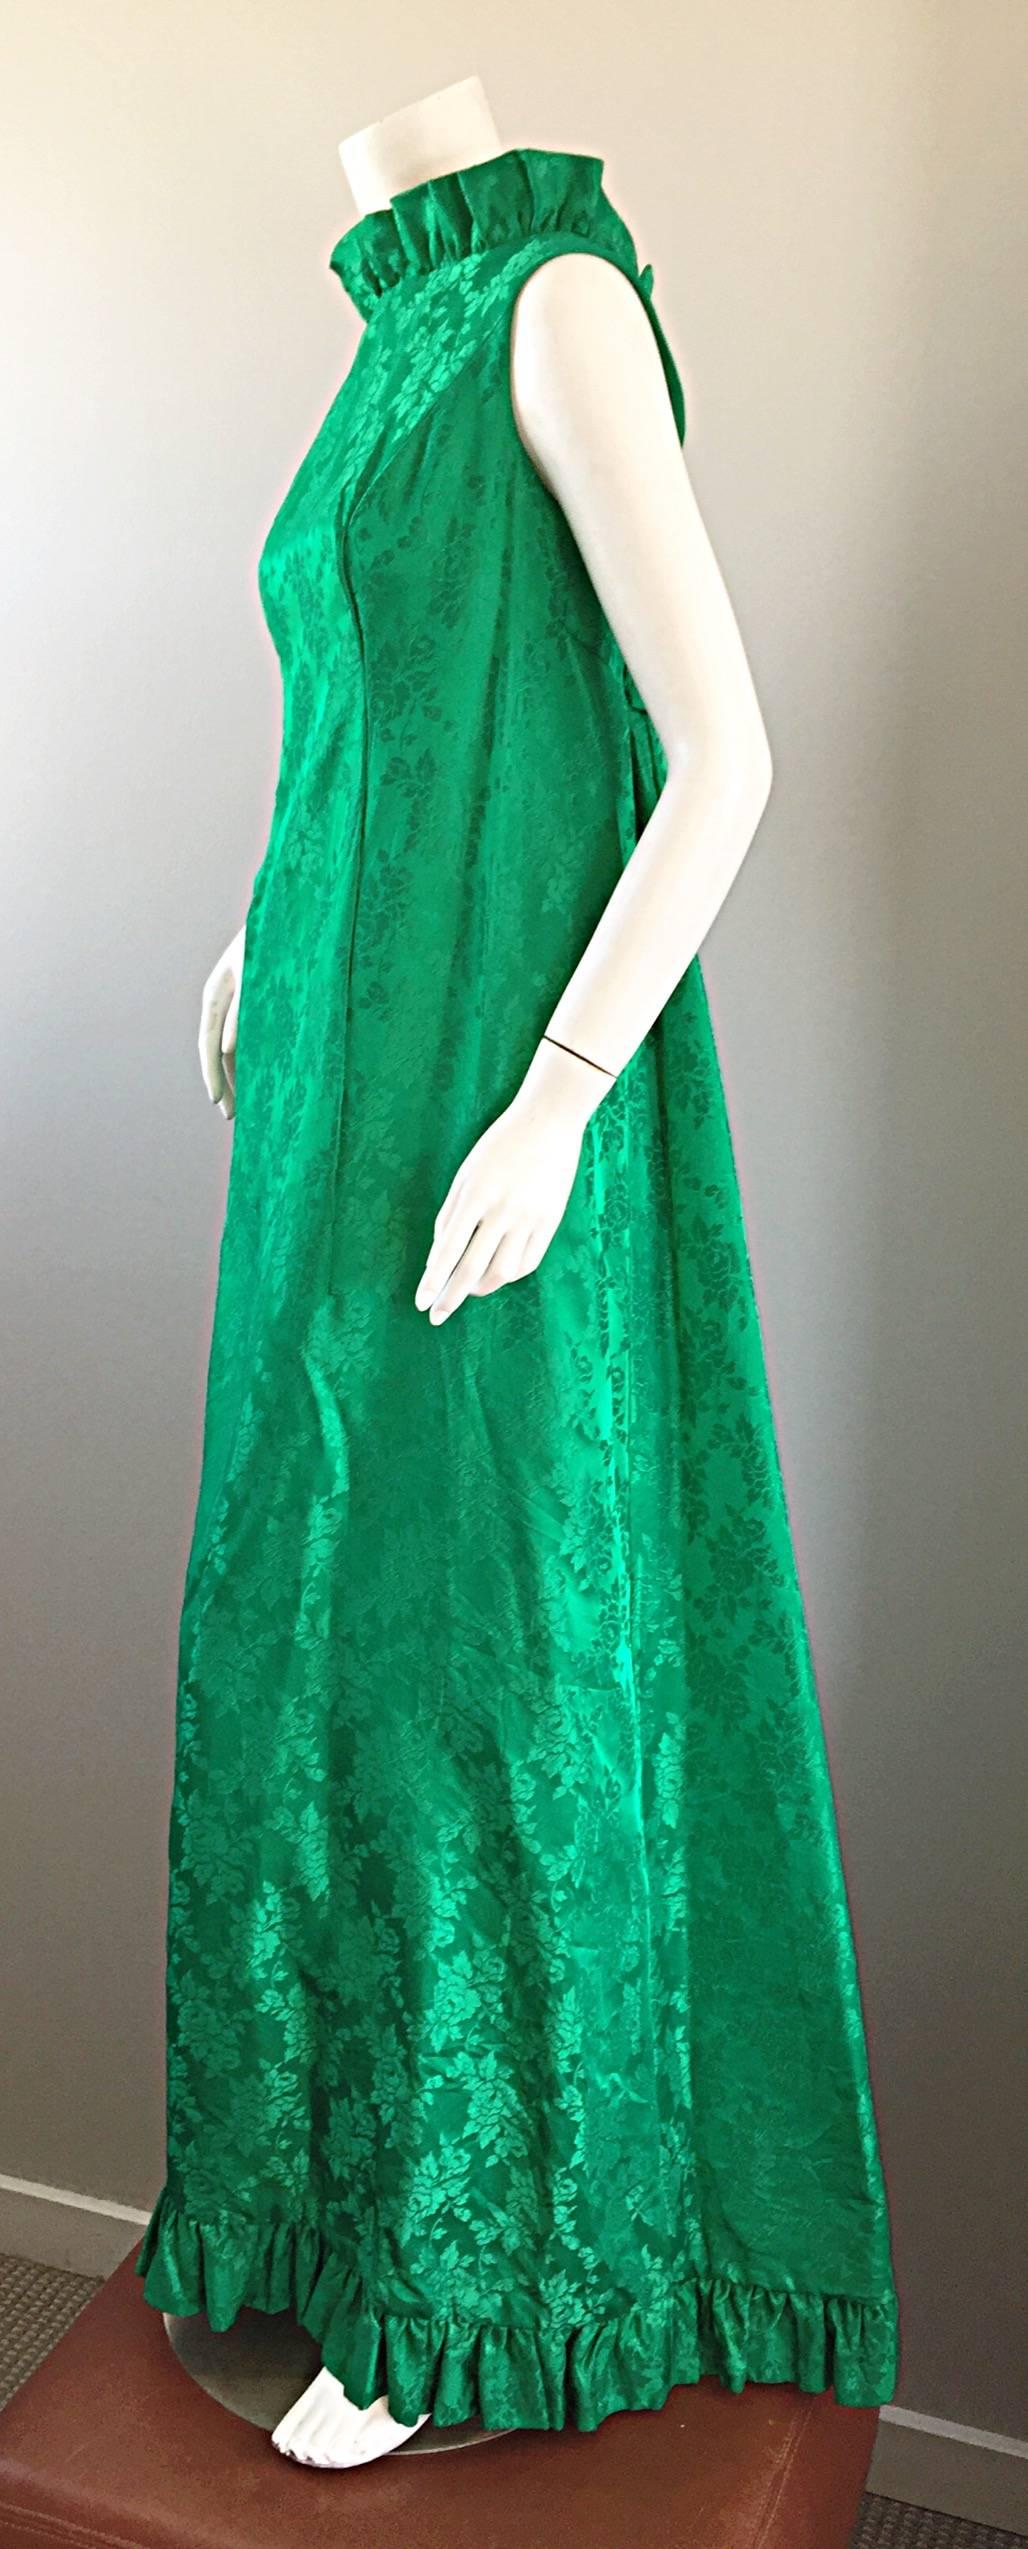 Exceptional and extremely rare 60s PRISCILLA OF BOSTON kelly green silk brocade evening dress, with attached train! Vibrant and beautiful green color, with an impressive floral brocade iridescent print. Ruffle high neck with a slight plunging back